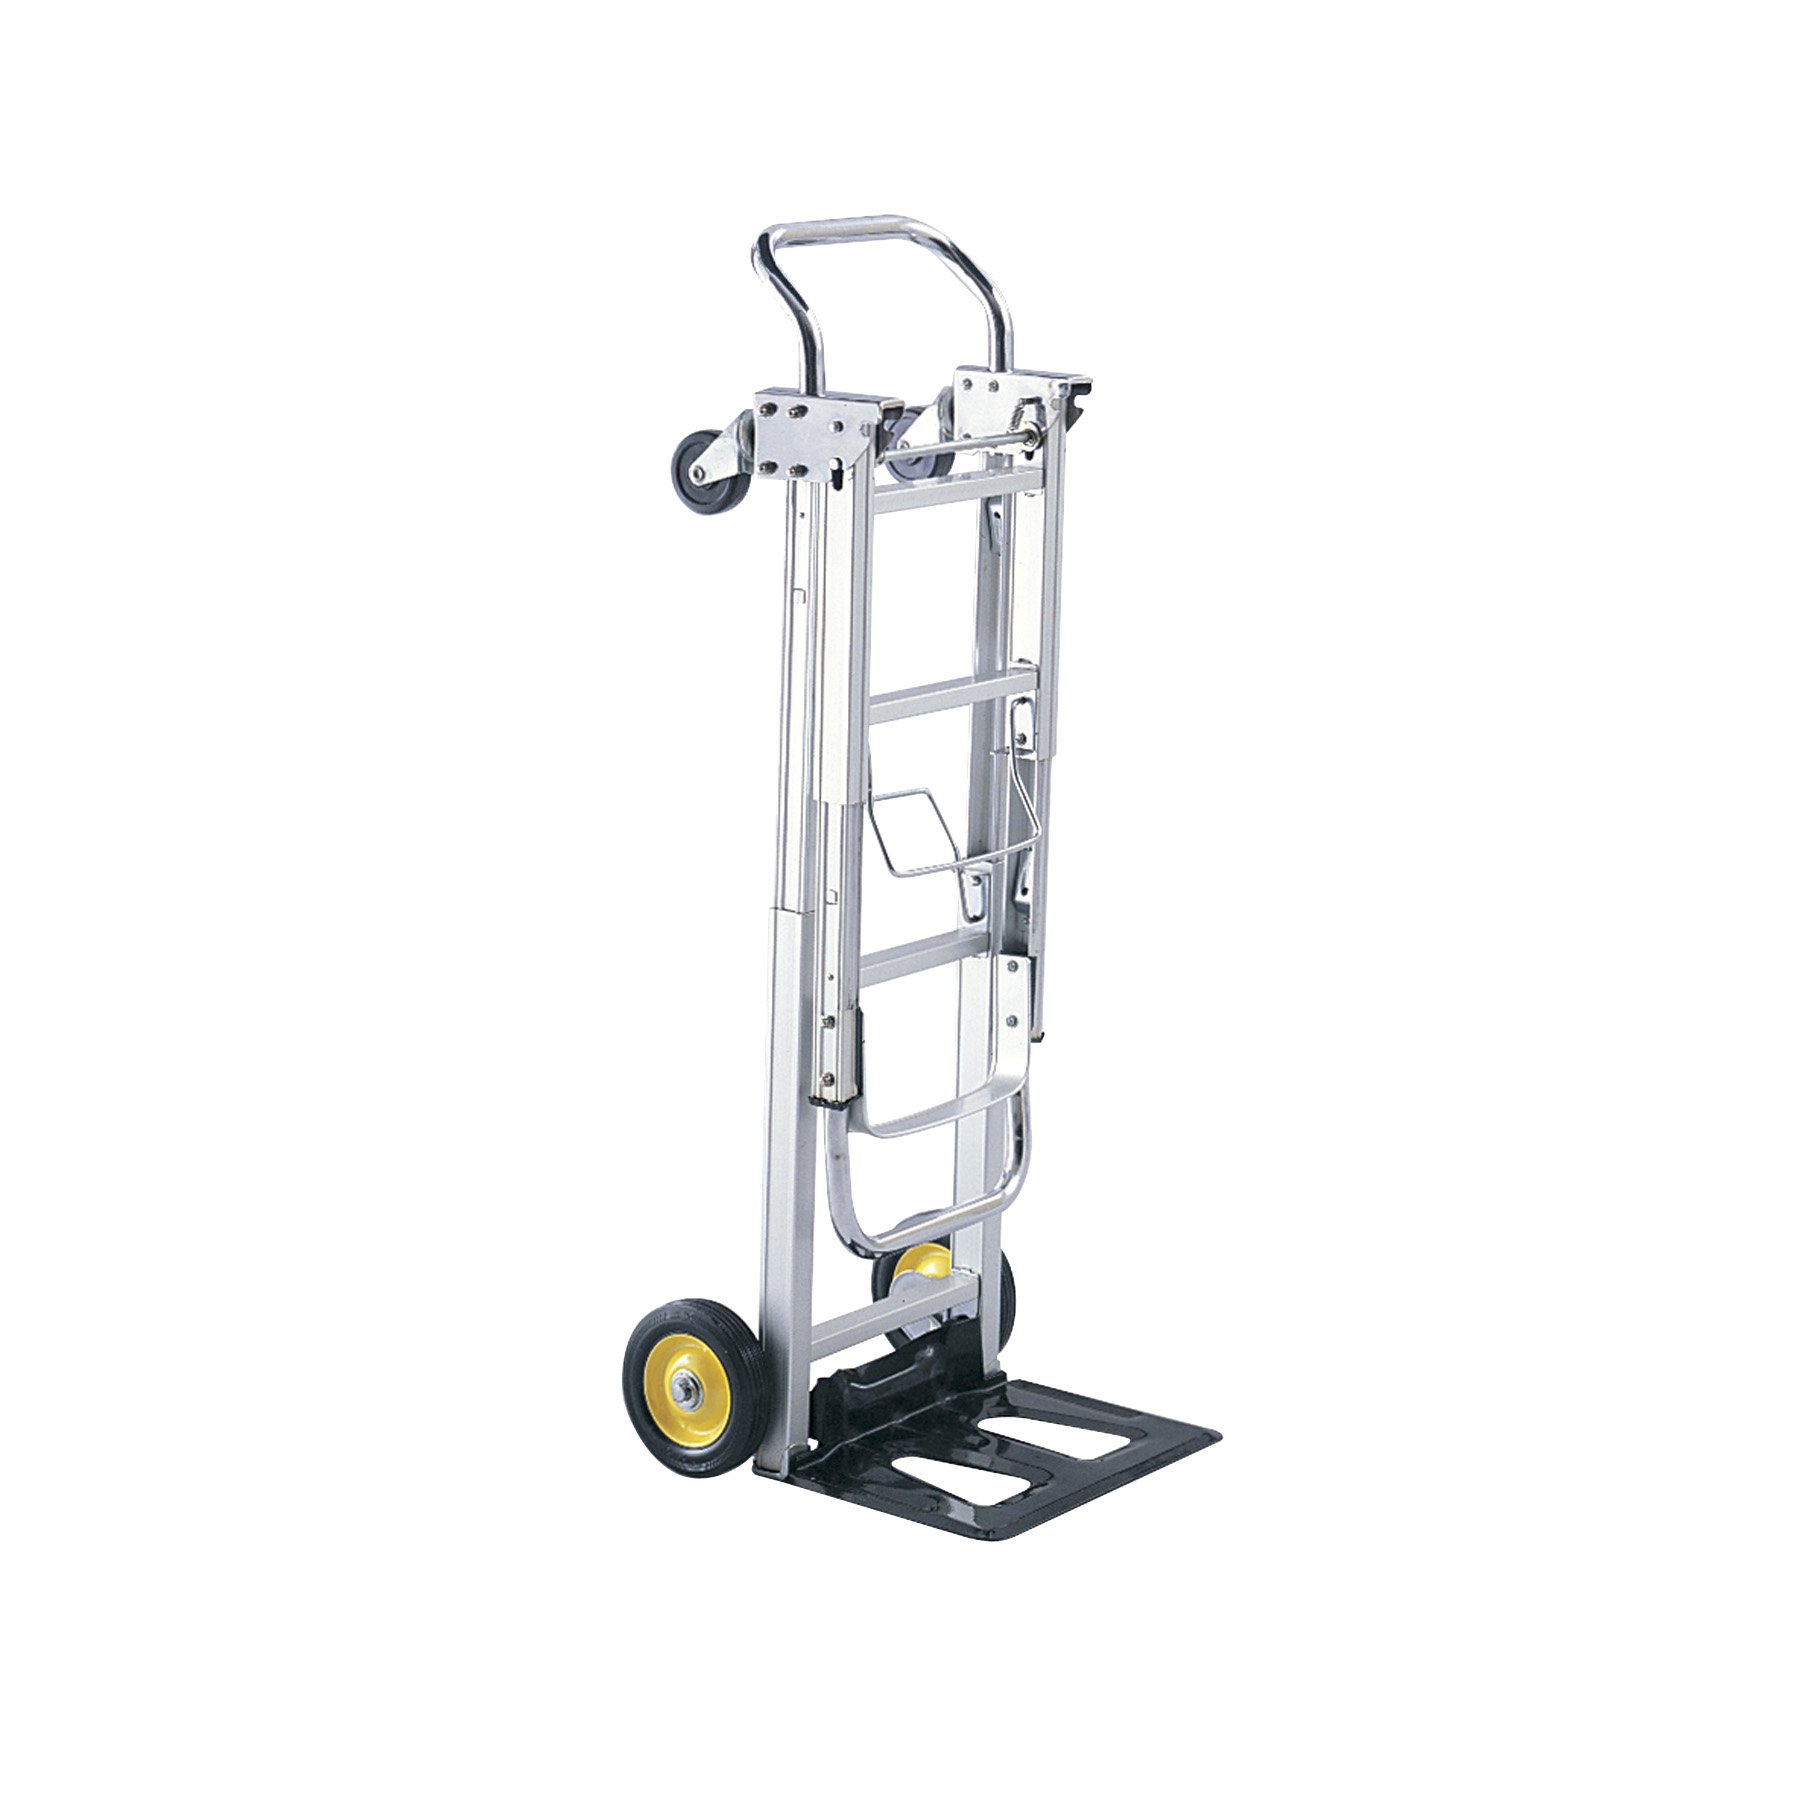 Safco Products 4086R Convertible Heavy-Duty Utility Hand Truck Red 